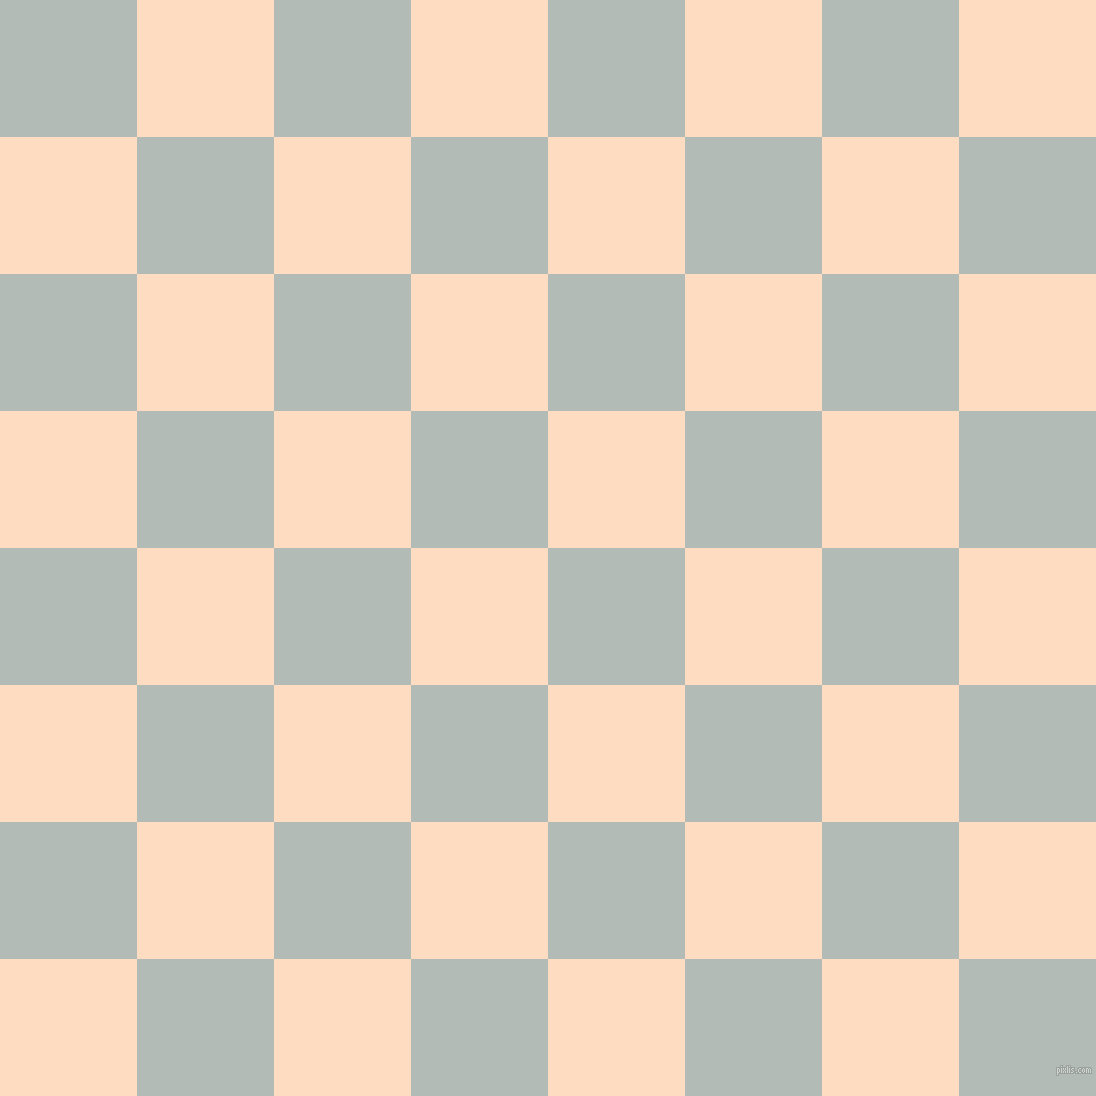 checkered chequered squares checkers background checker pattern, 137 pixel squares size, , Loblolly and Karry checkers chequered checkered squares seamless tileable